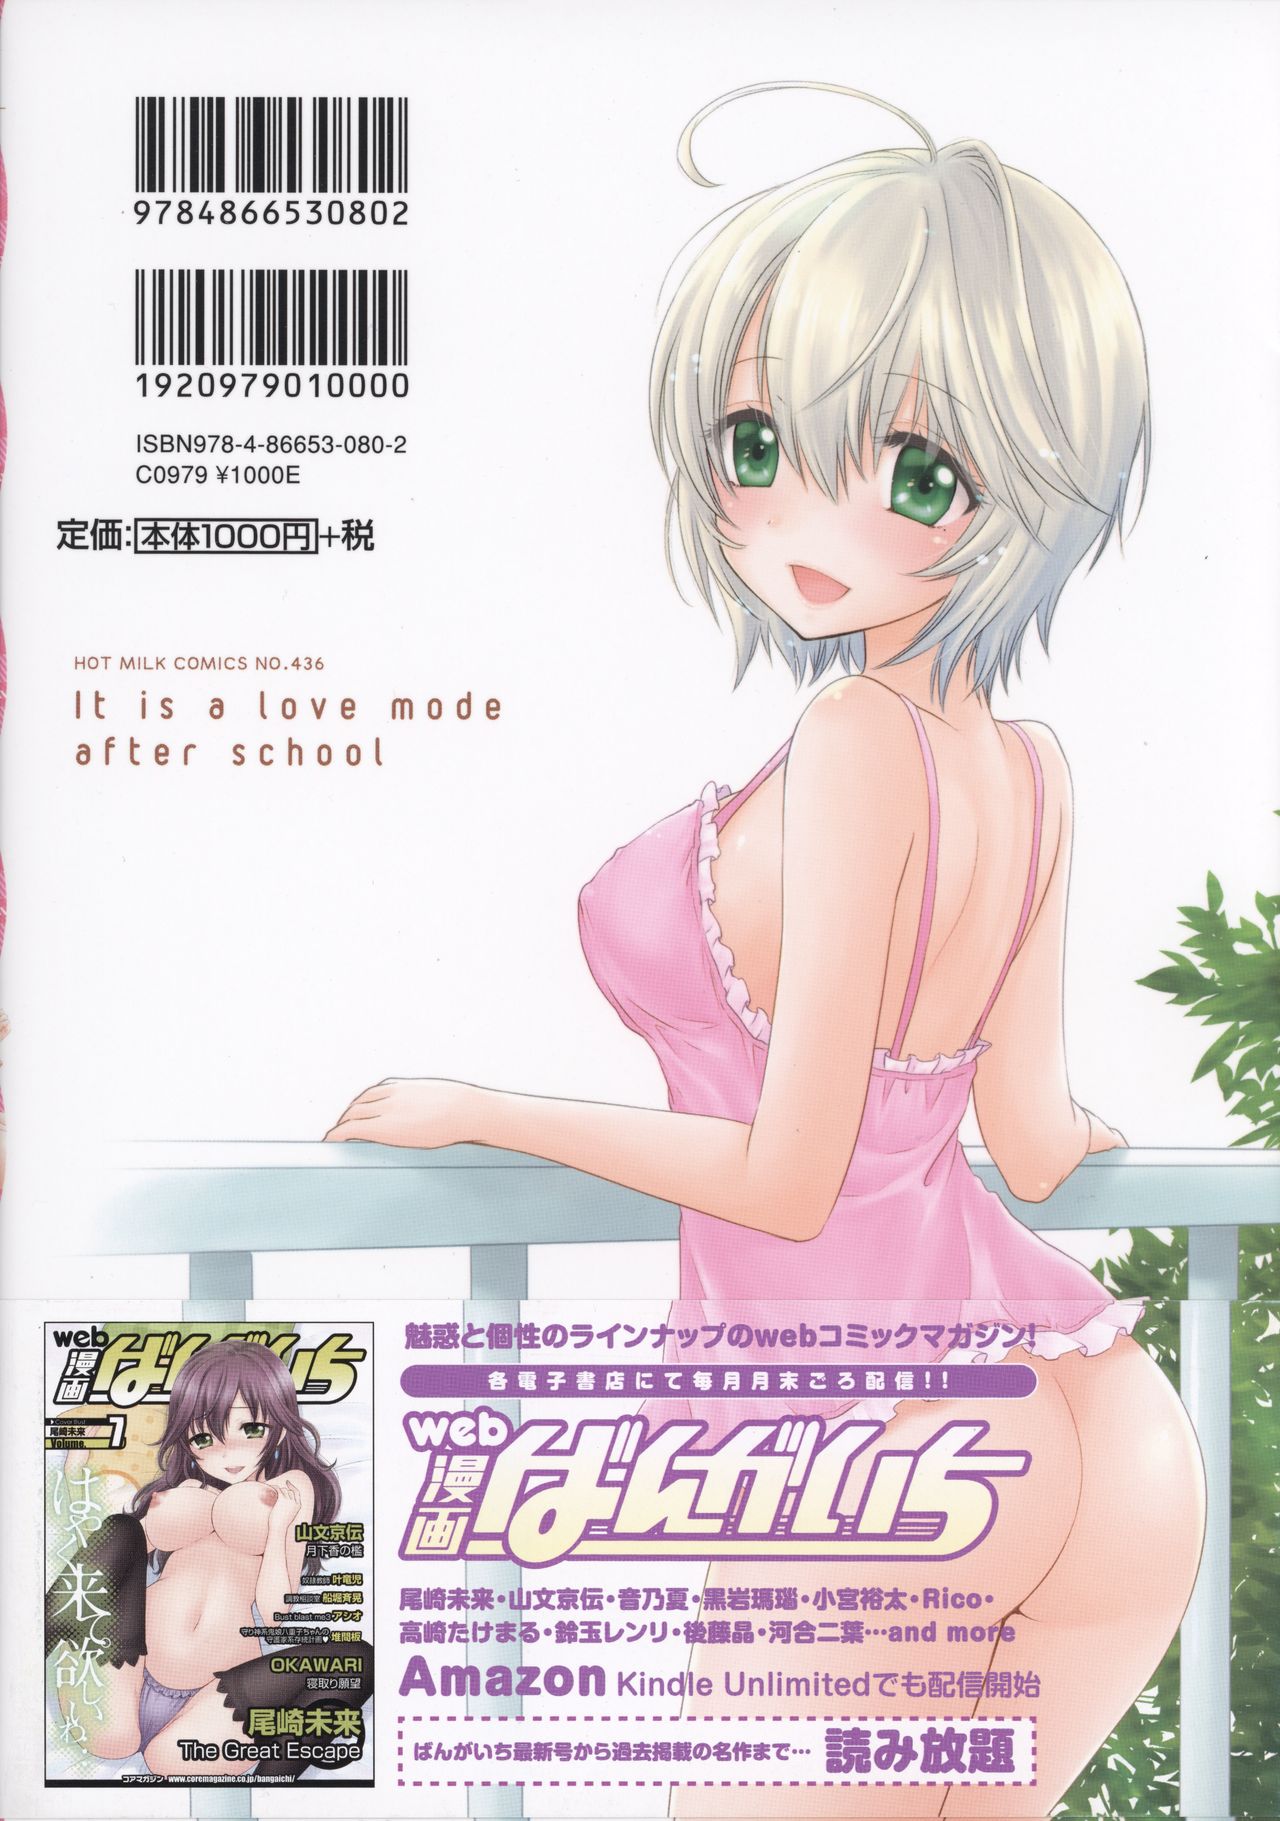 [Ozaki Miray] Houkago Love Mode - It is a love mode after school page 227 full